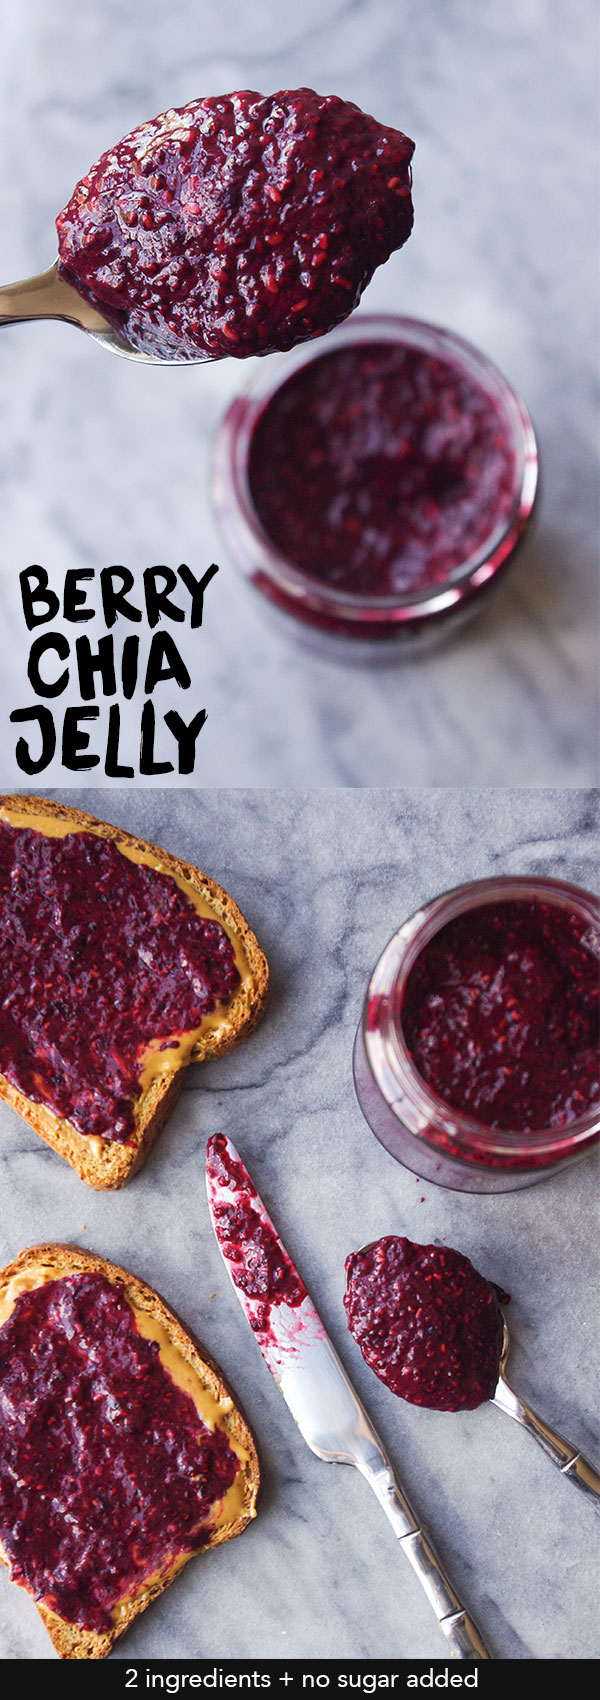 Berry Chia Jelly - No added sugar and just 2 ingredients to make healthy homemade jelly #noaddedsugar #nosugaradded #chiaseeds #chiajam | www.thebatterthickens.com